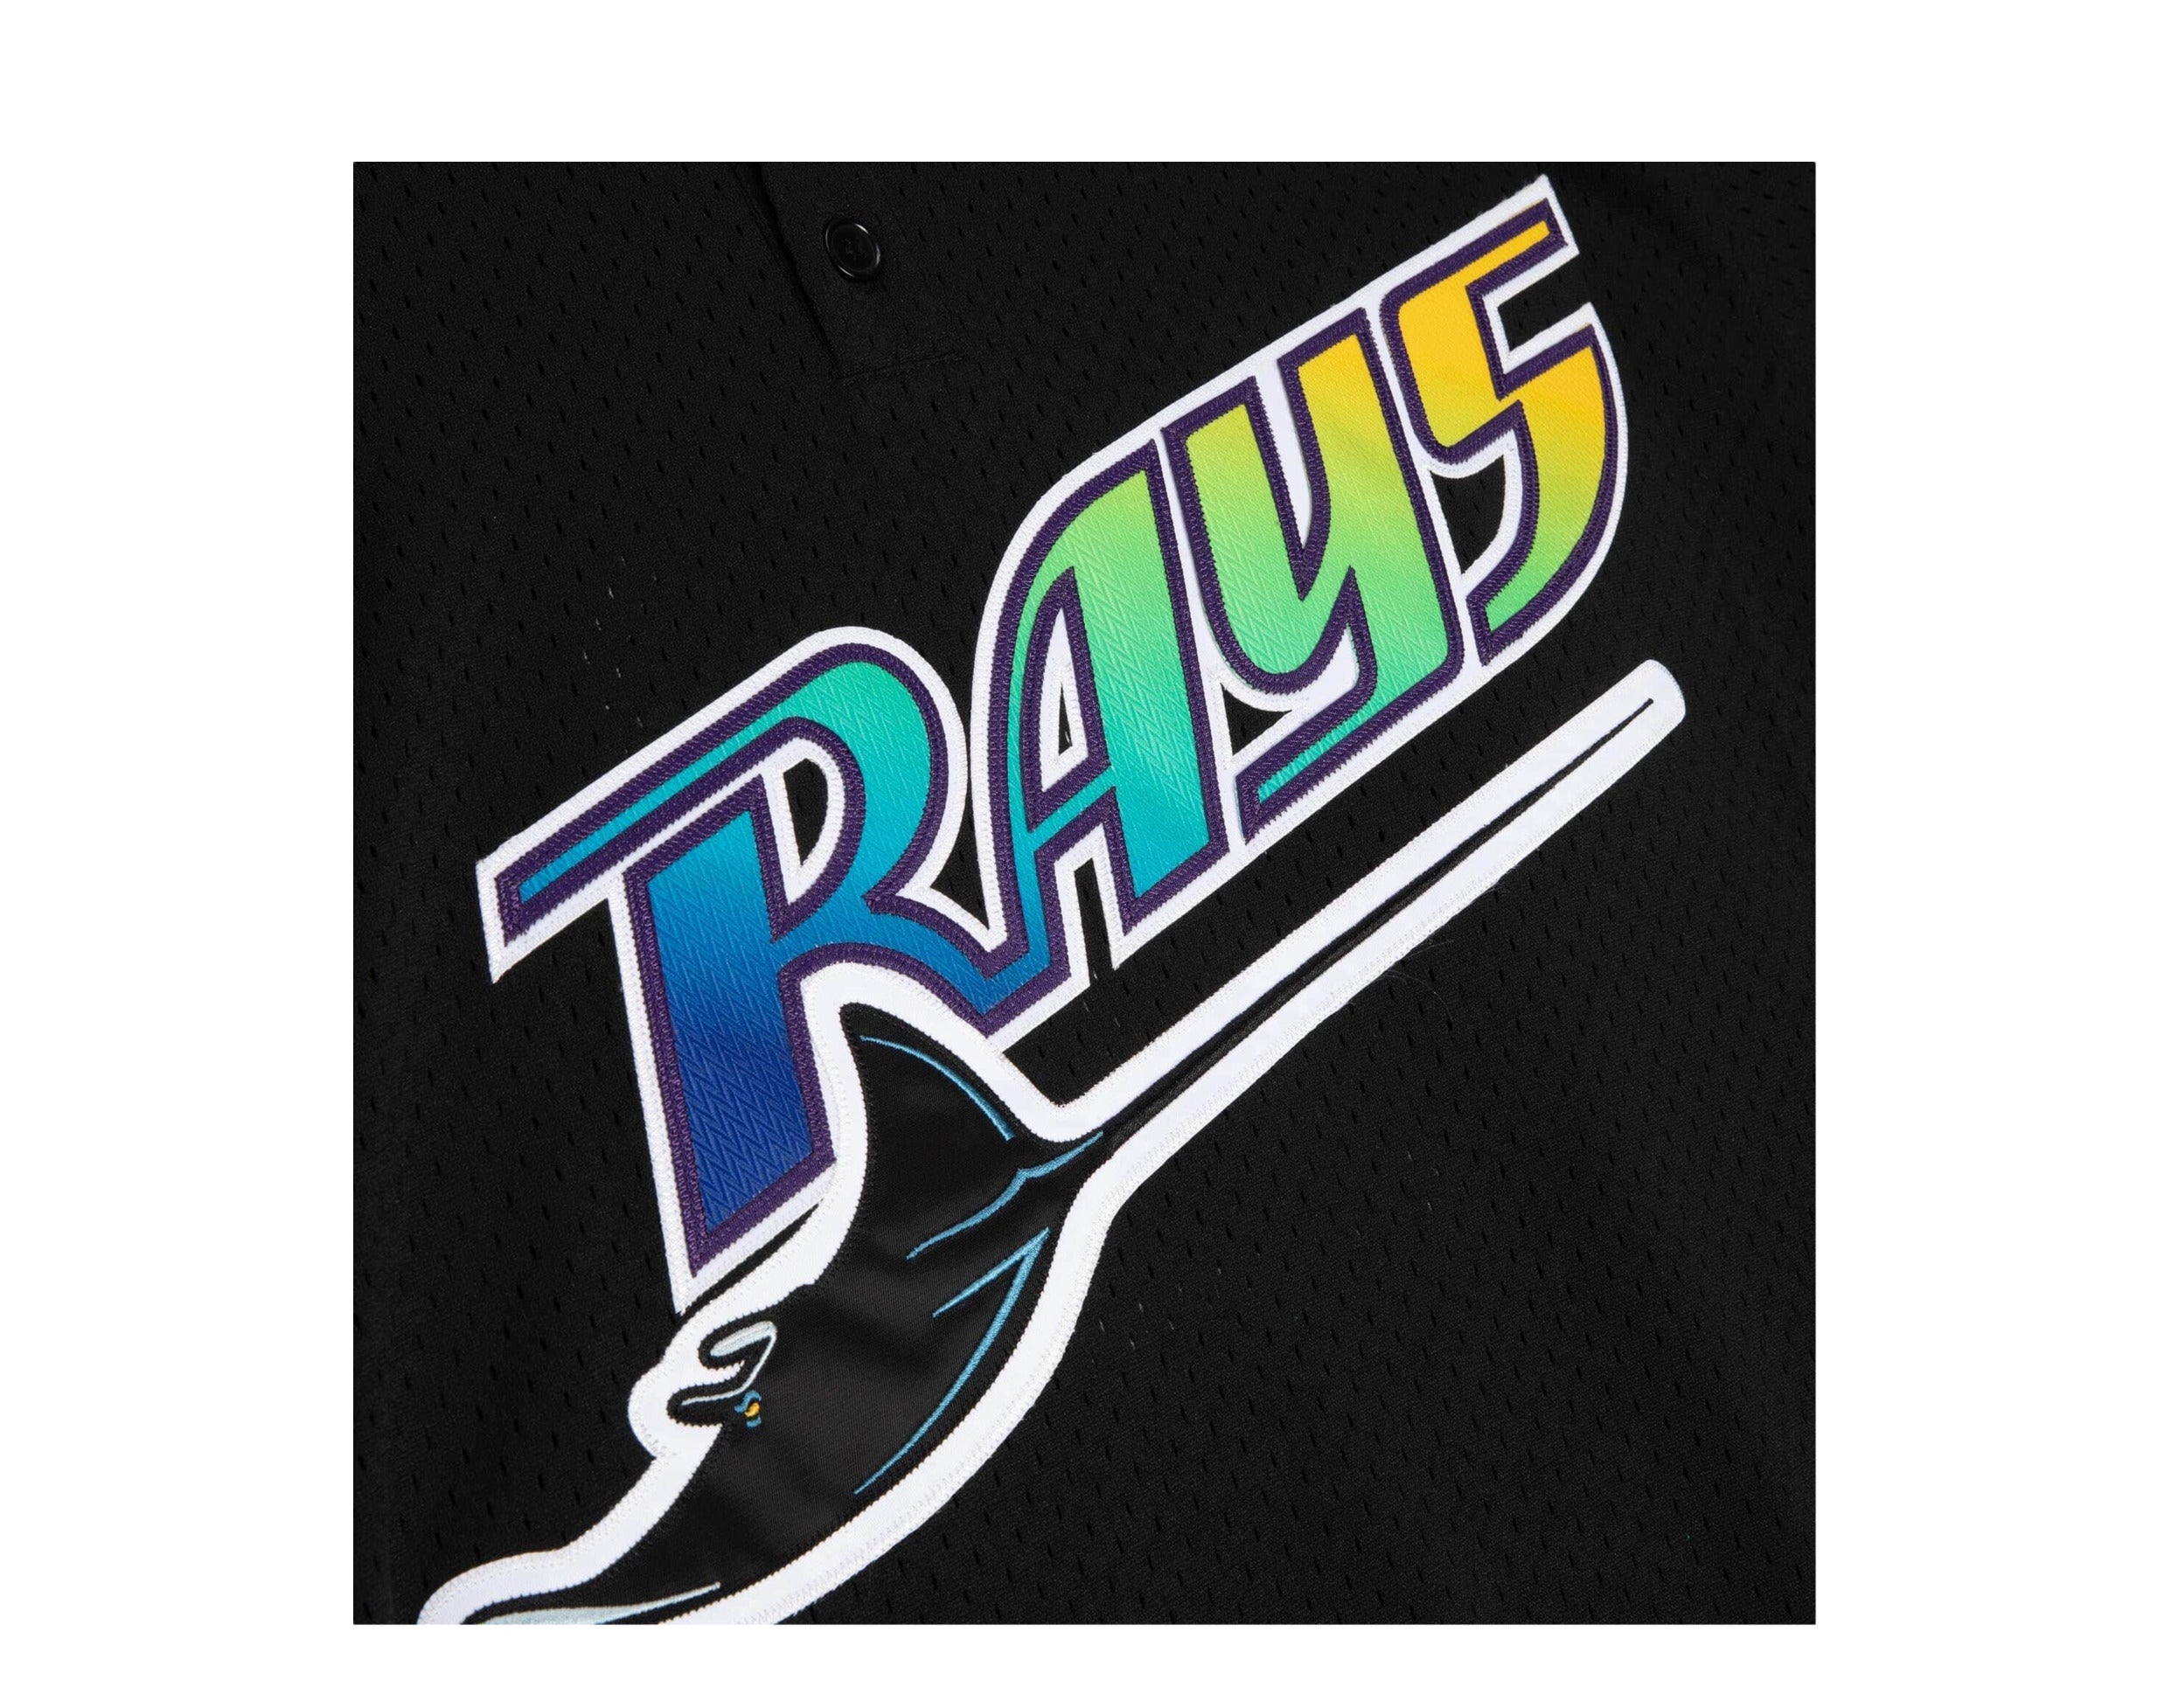 Tampa Bay Devil Rays Authentic Mesh BP Inaugural Year Jersey